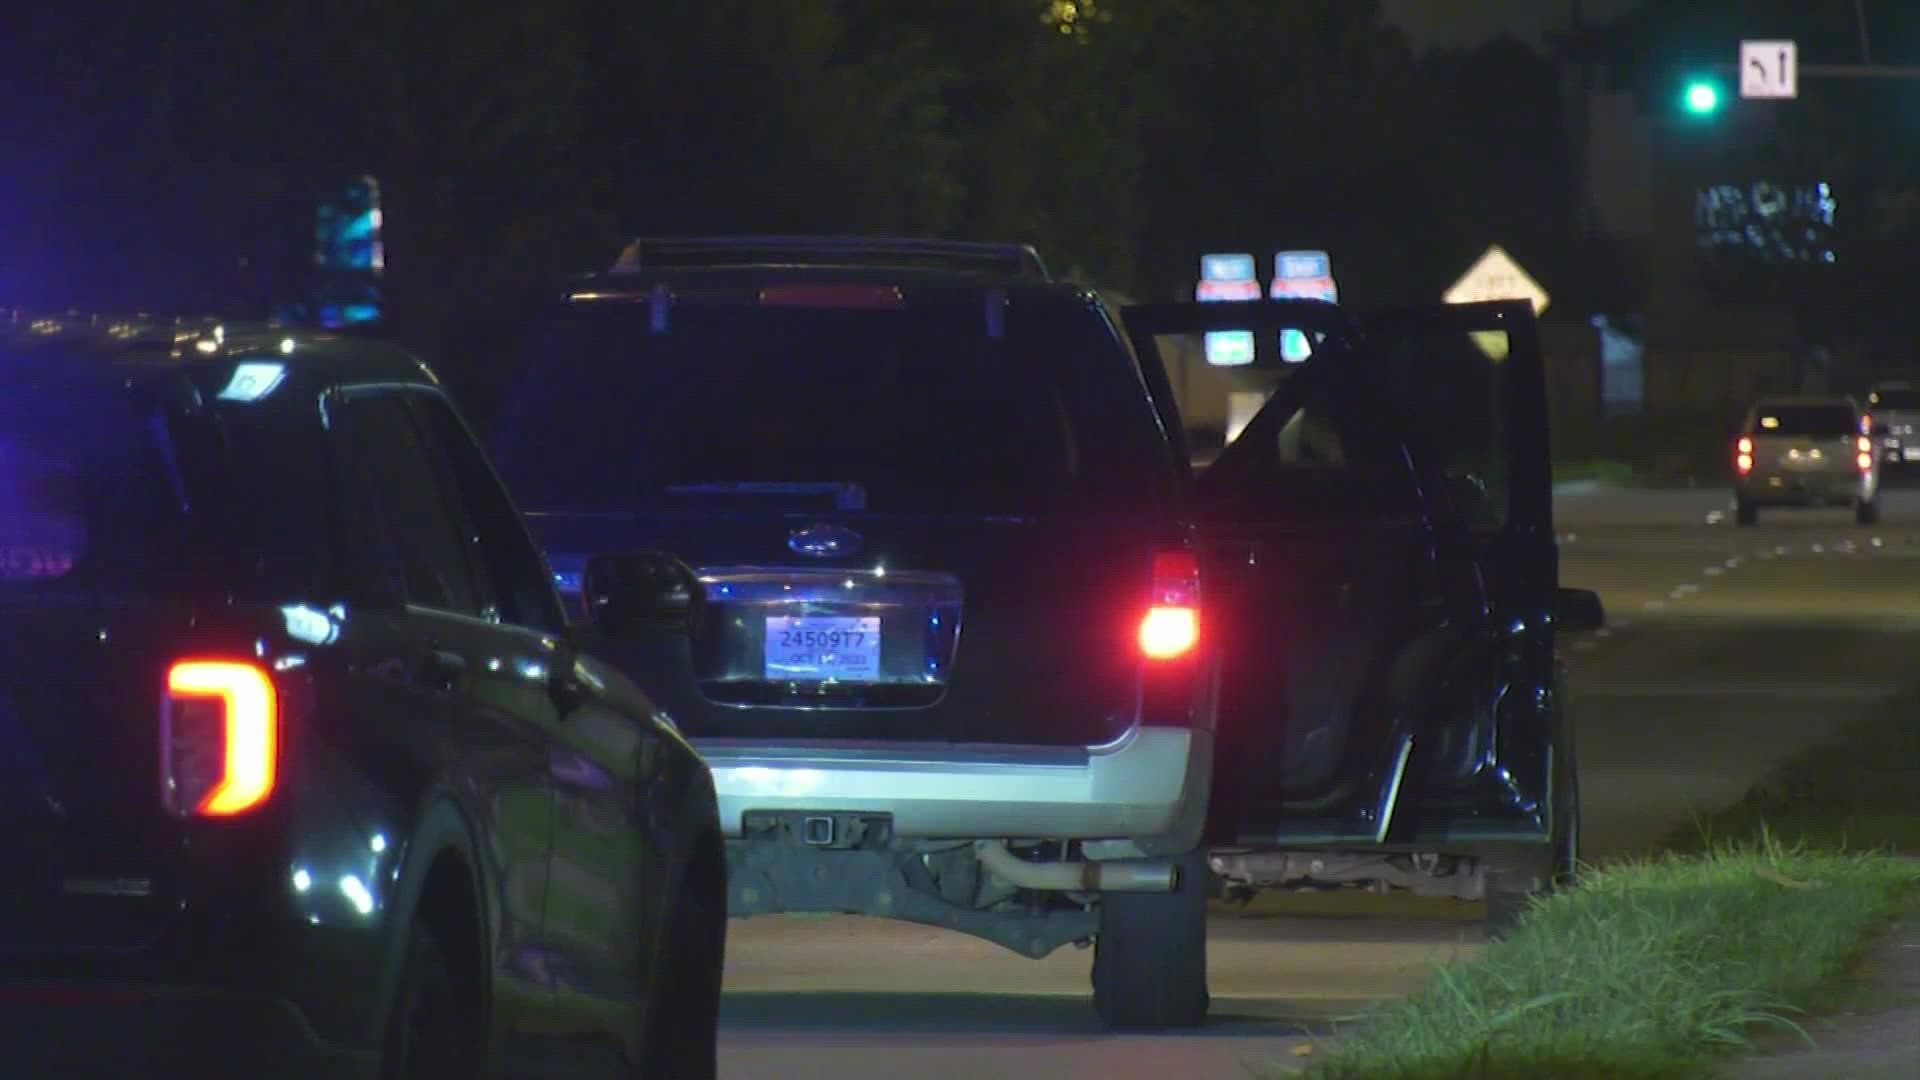 KHOU 11's Brittany Ford reports the driver who opened fire is still on the loose